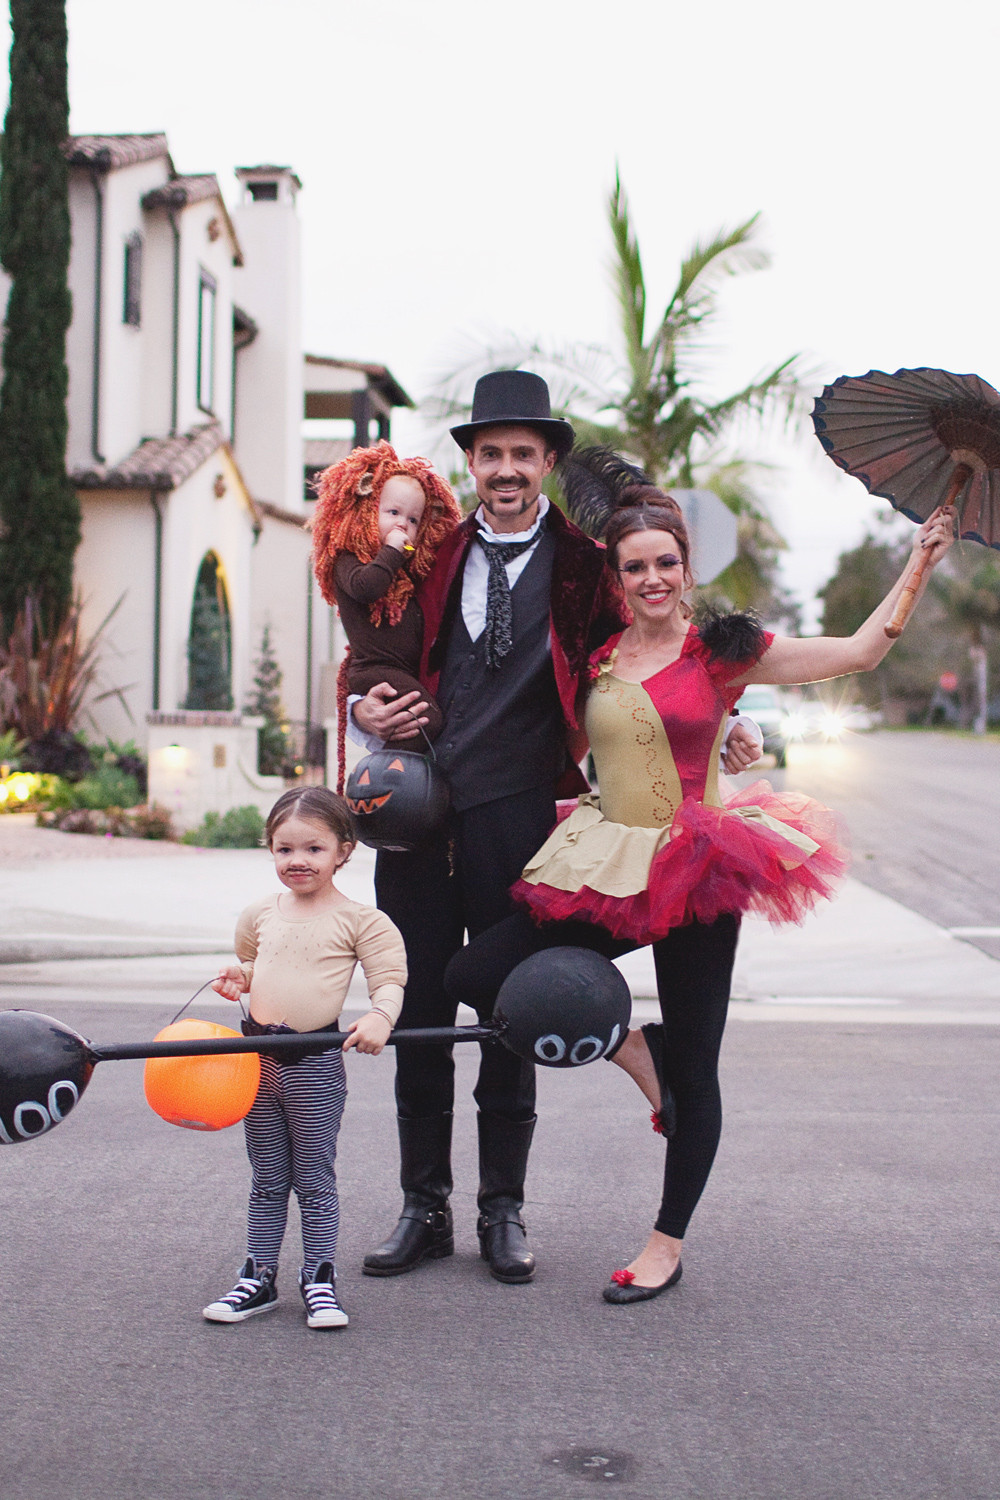 DIY Family Halloween Costumes
 DIY ROBOT FAMILY COSTUME Tell Love and Party